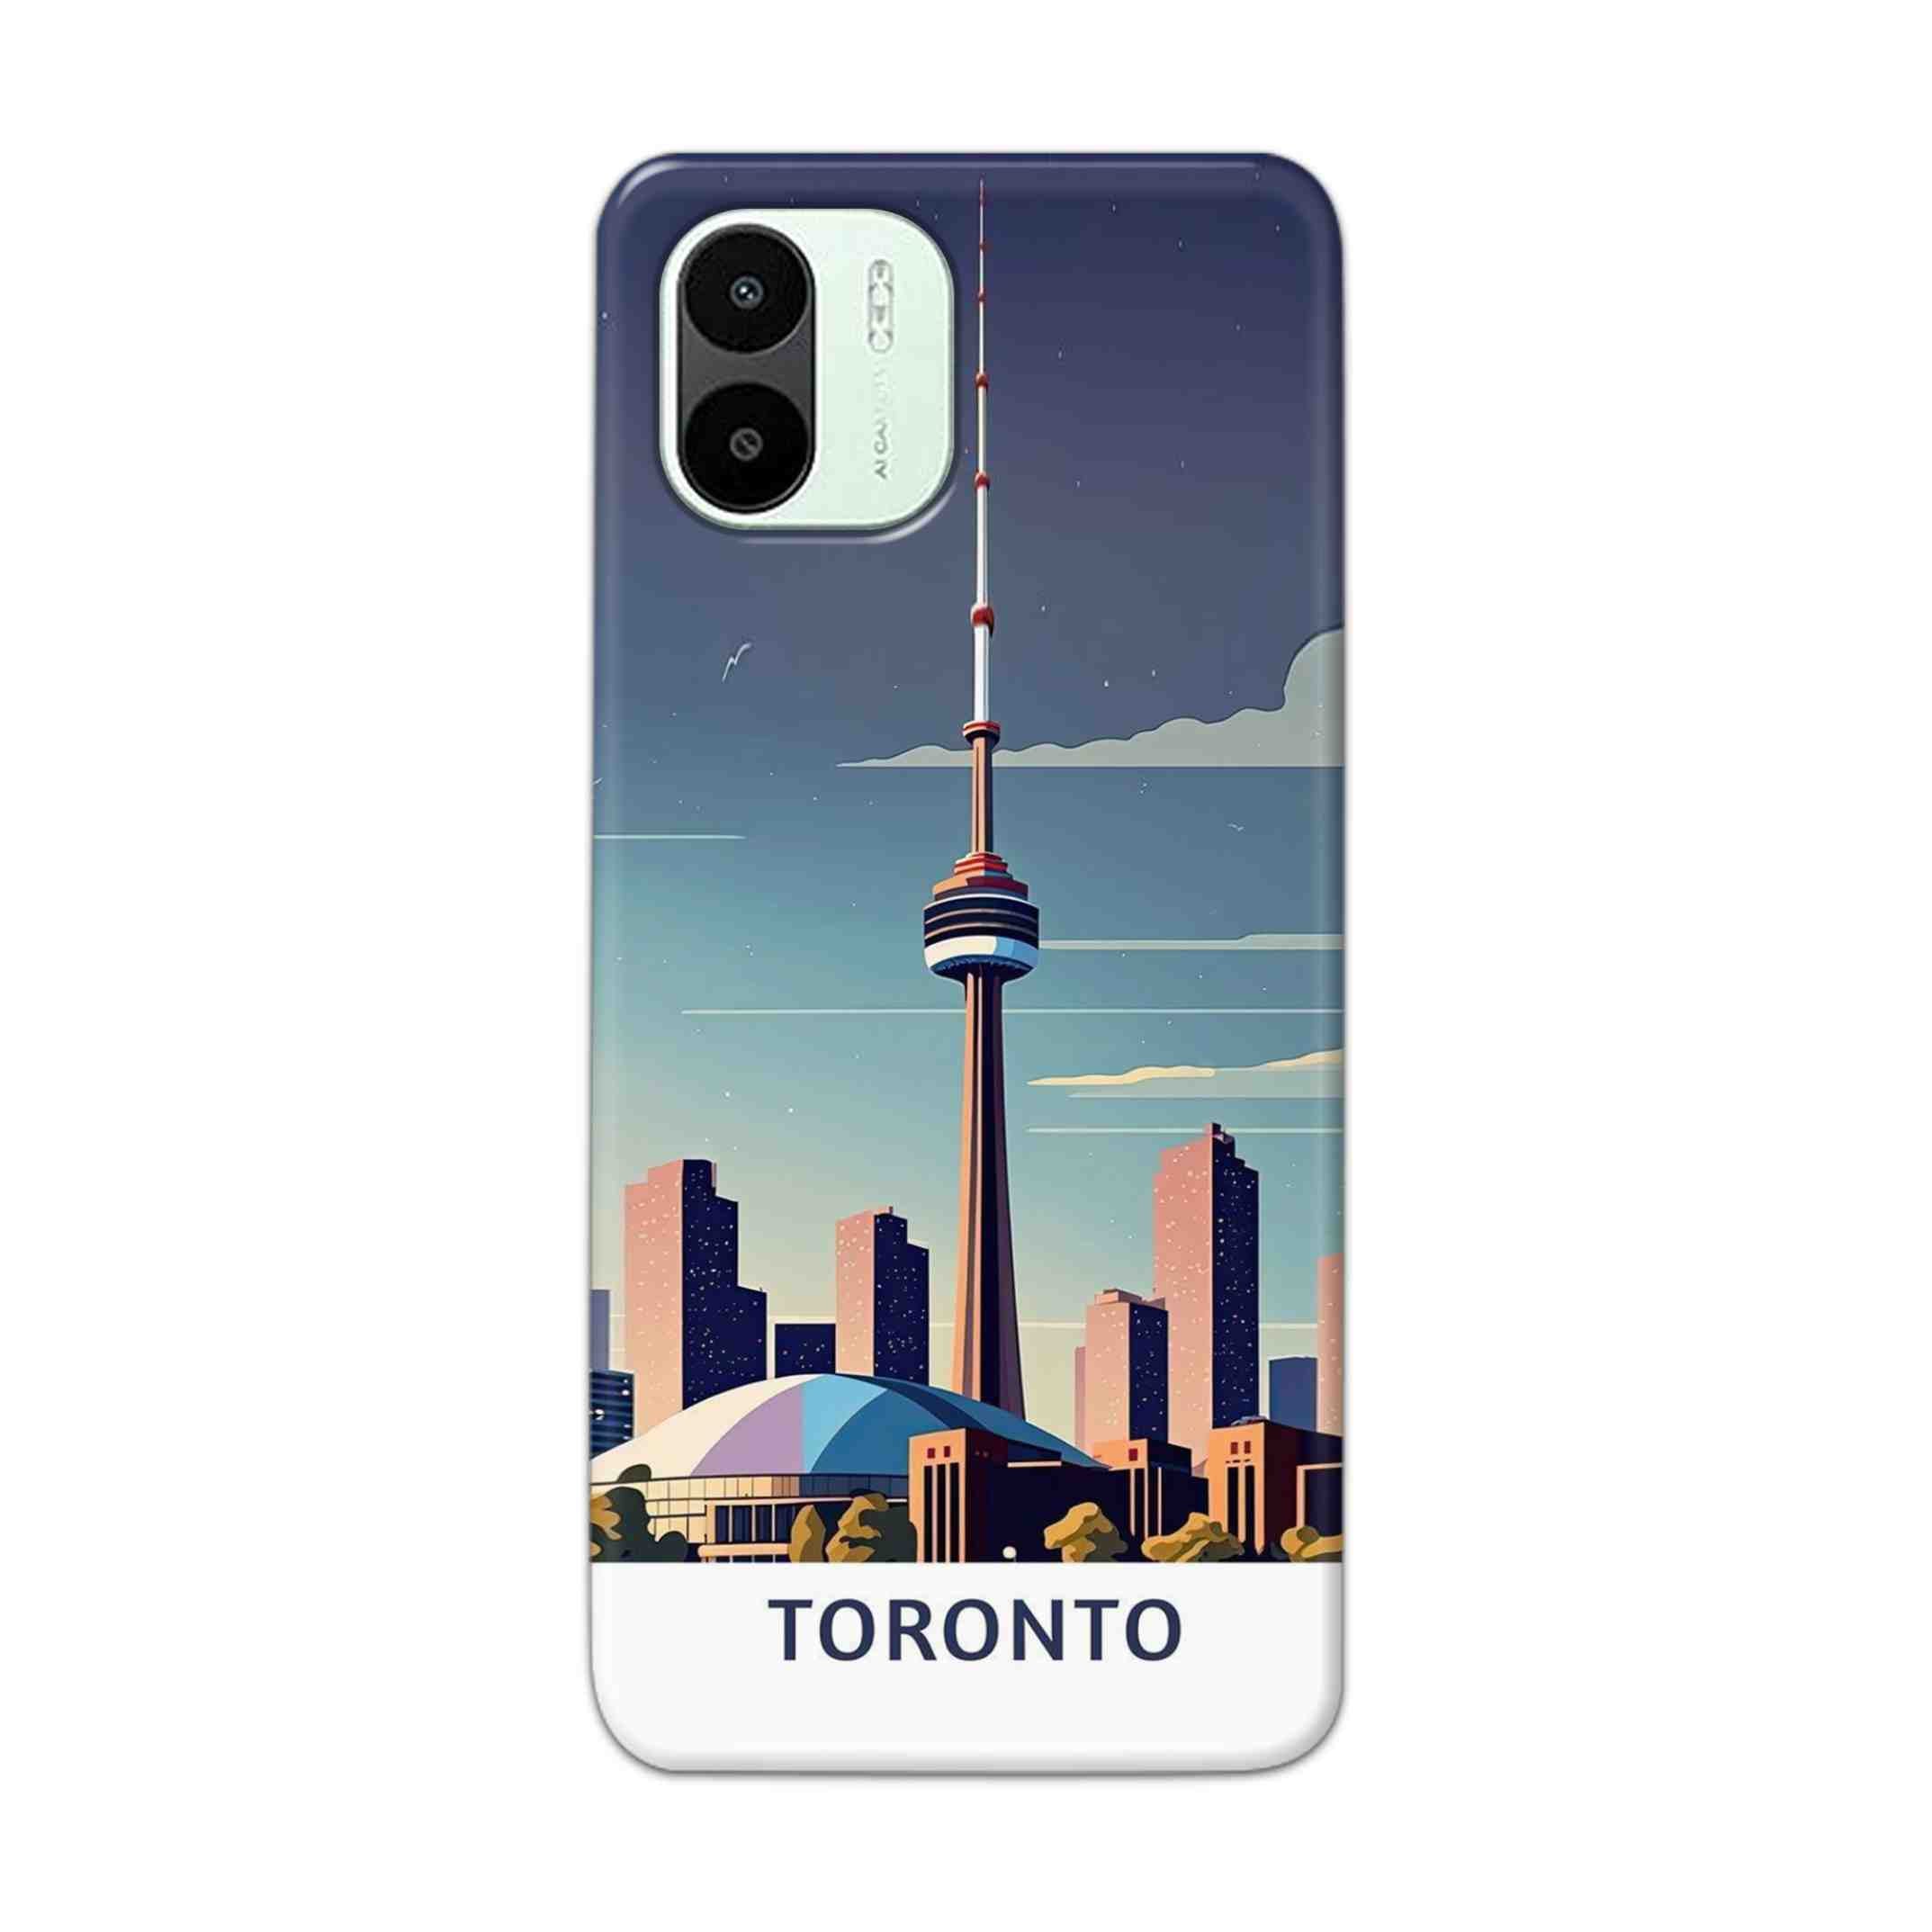 Buy Toronto Hard Back Mobile Phone Case Cover For Xiaomi Redmi A1 5G Online